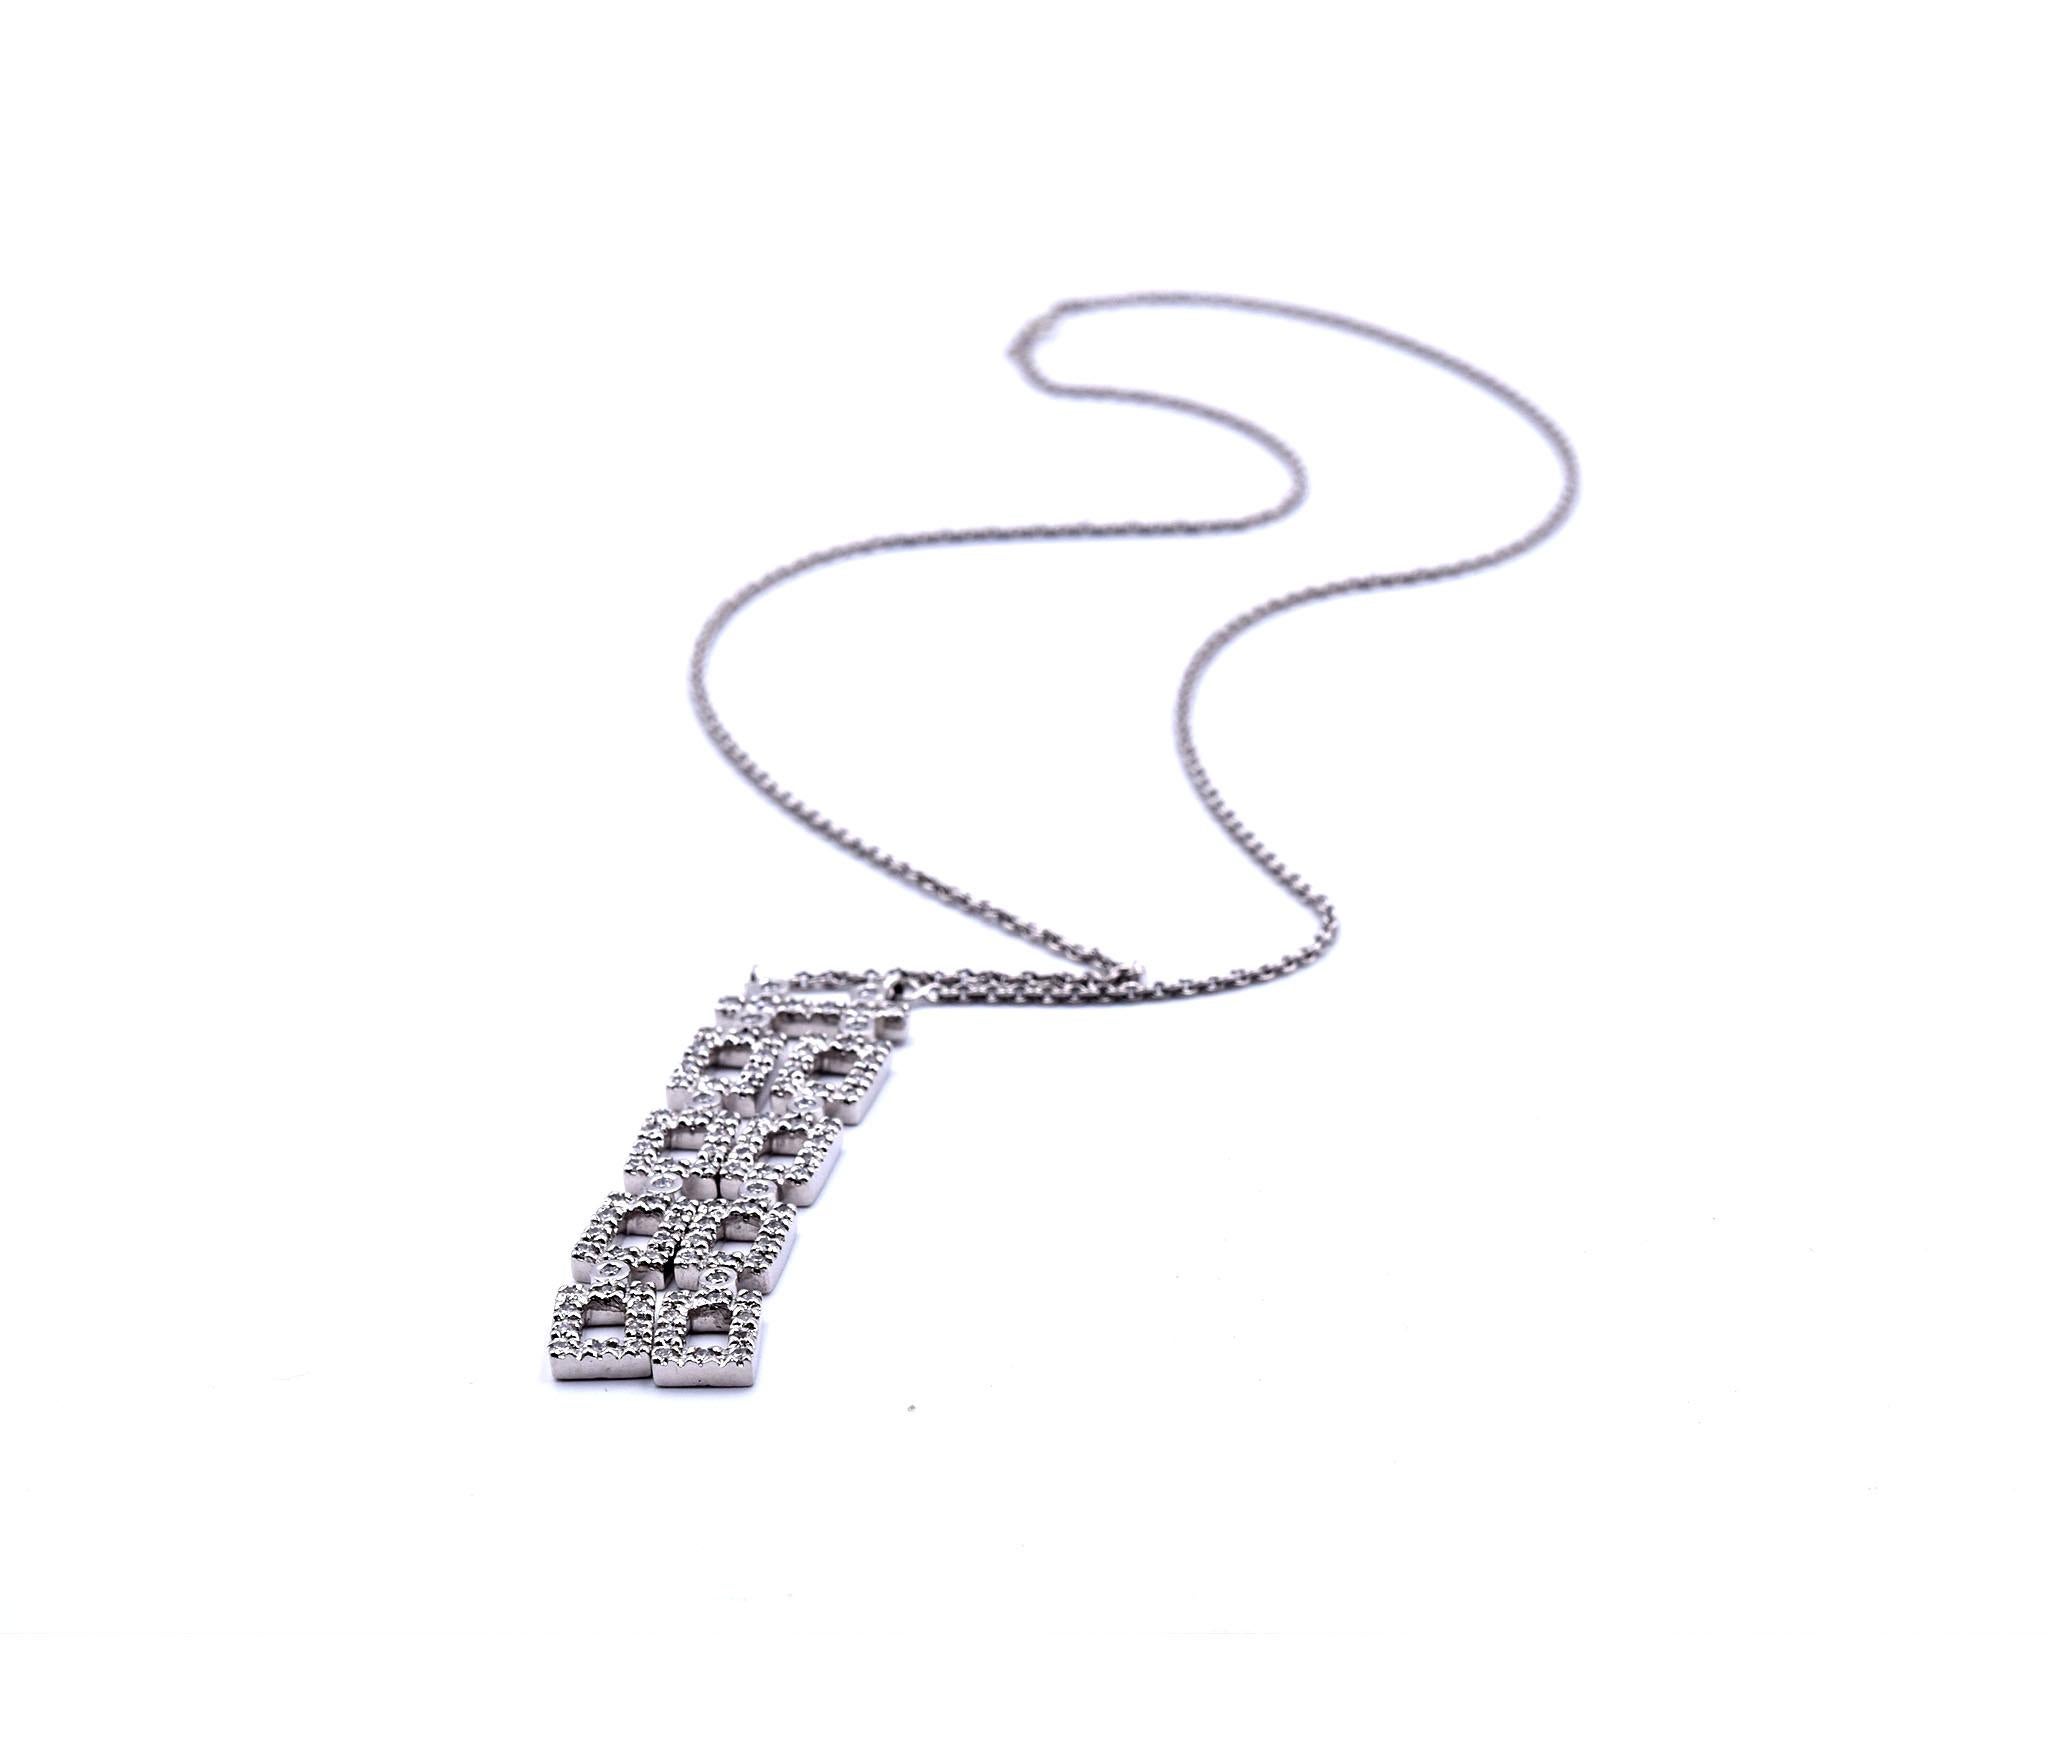 Designer: custom designed
Material: 14k white gold
Diamonds: 96 round brilliant cut= 1.44cttw 
Color: G
Clarity: VS
Dimensions: necklace is 18-inches long and square drop  is 2-inches long and 13.25mm wide
Weight: 13.02 grams
